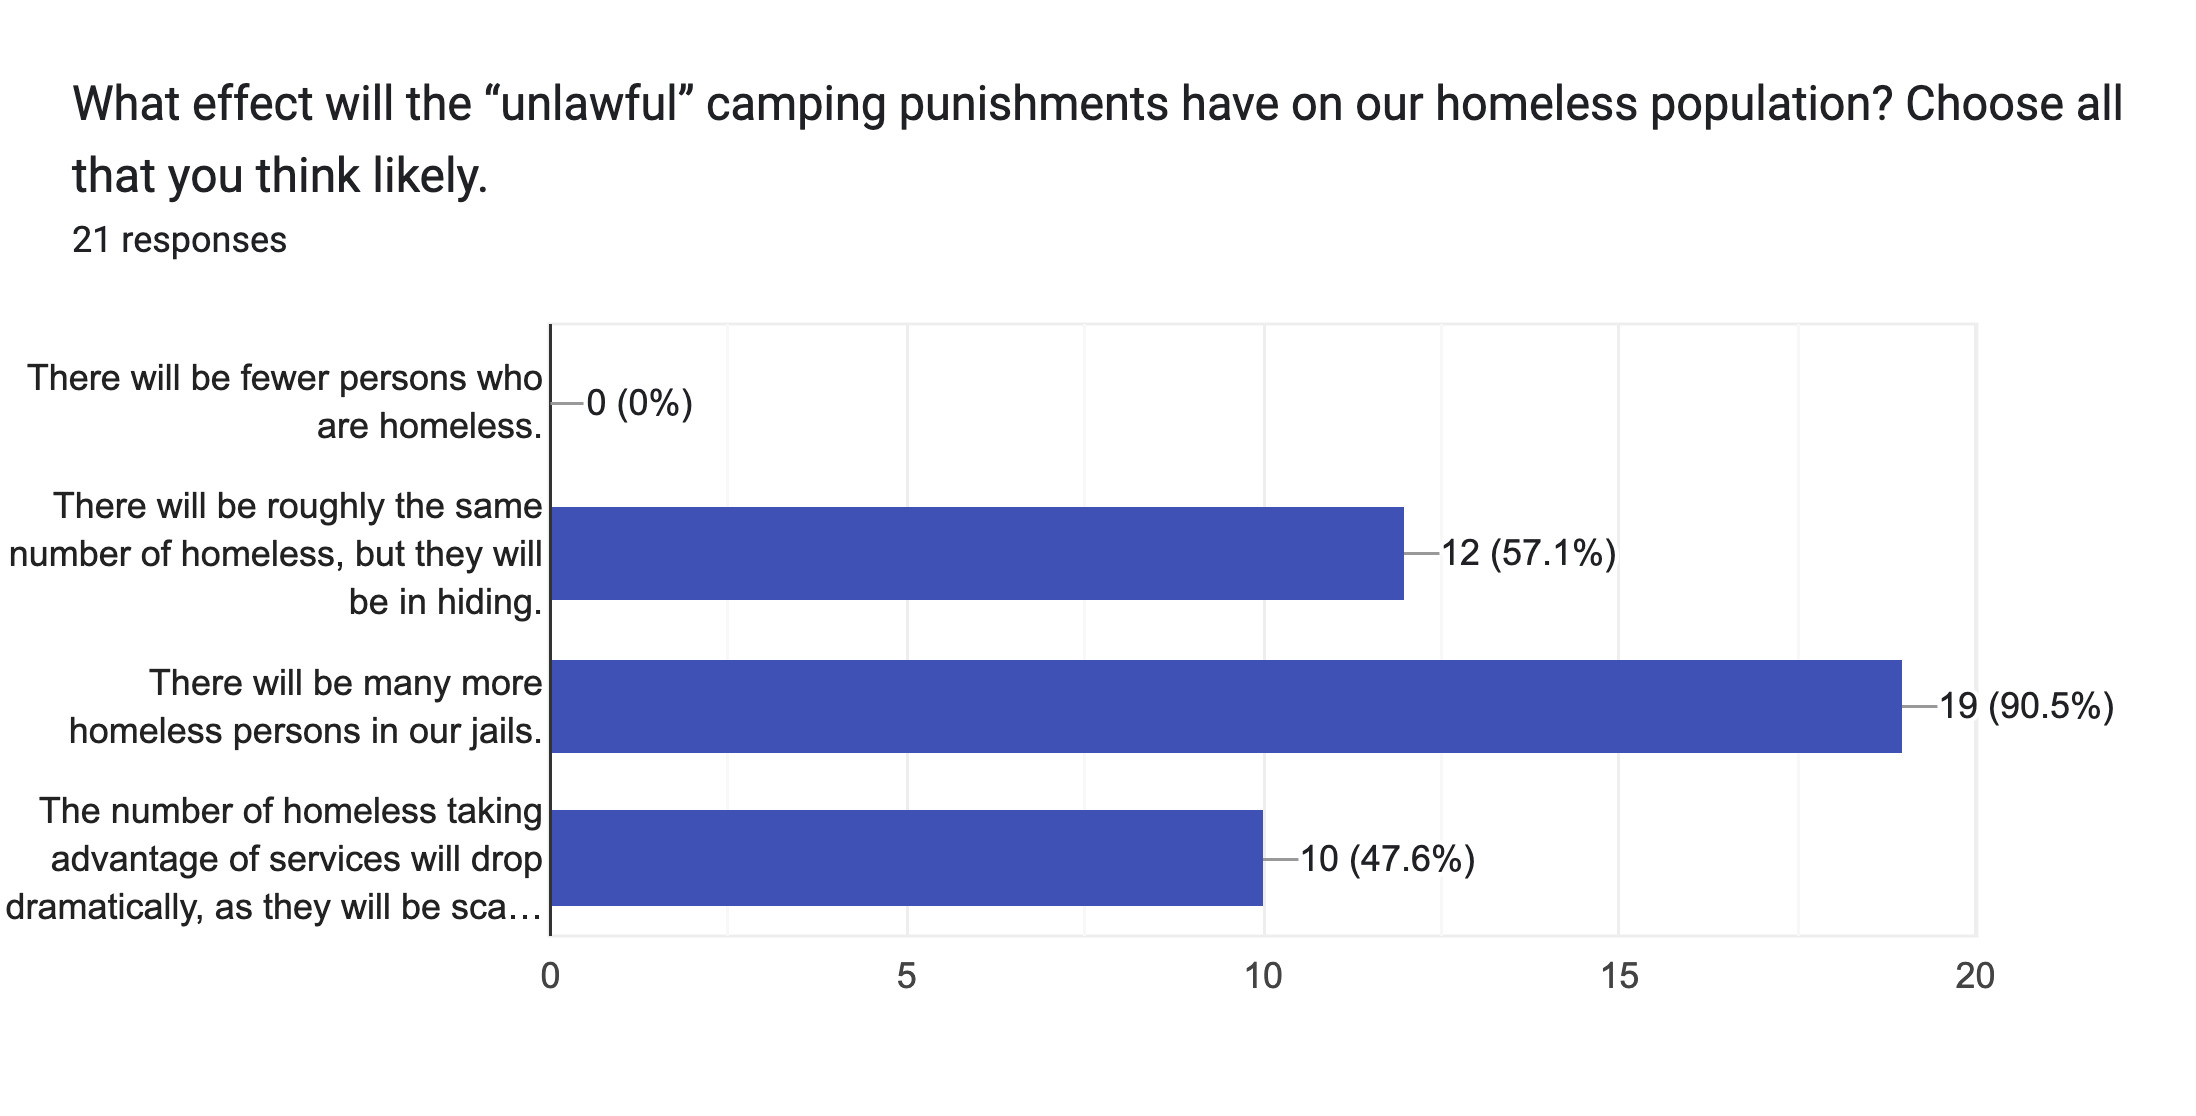 Forms response chart. Question title: What effect will the “unlawful” camping punishments have on our homeless population? Choose all that you think likely.. Number of responses: 21 responses.